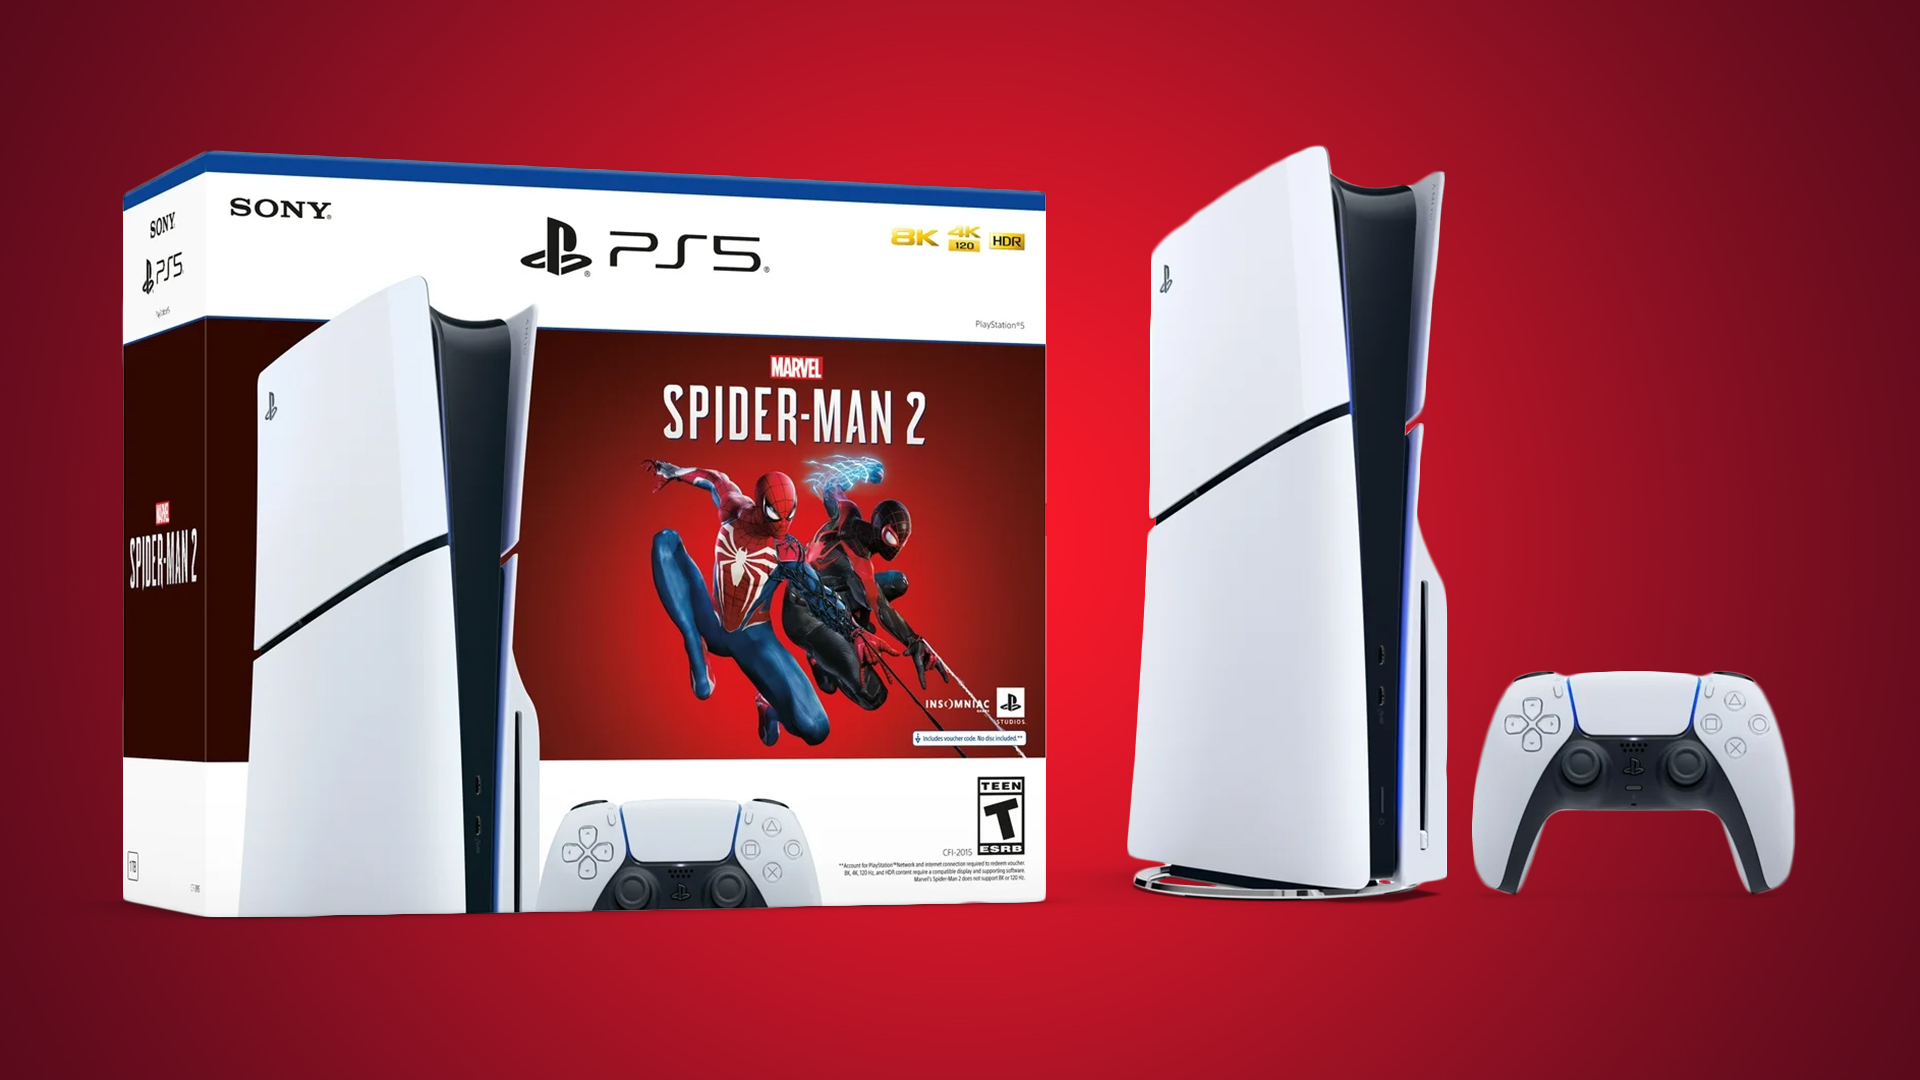 All-new PS5 Slim now available as part of a Marvel's Spider-Man 2 bundle